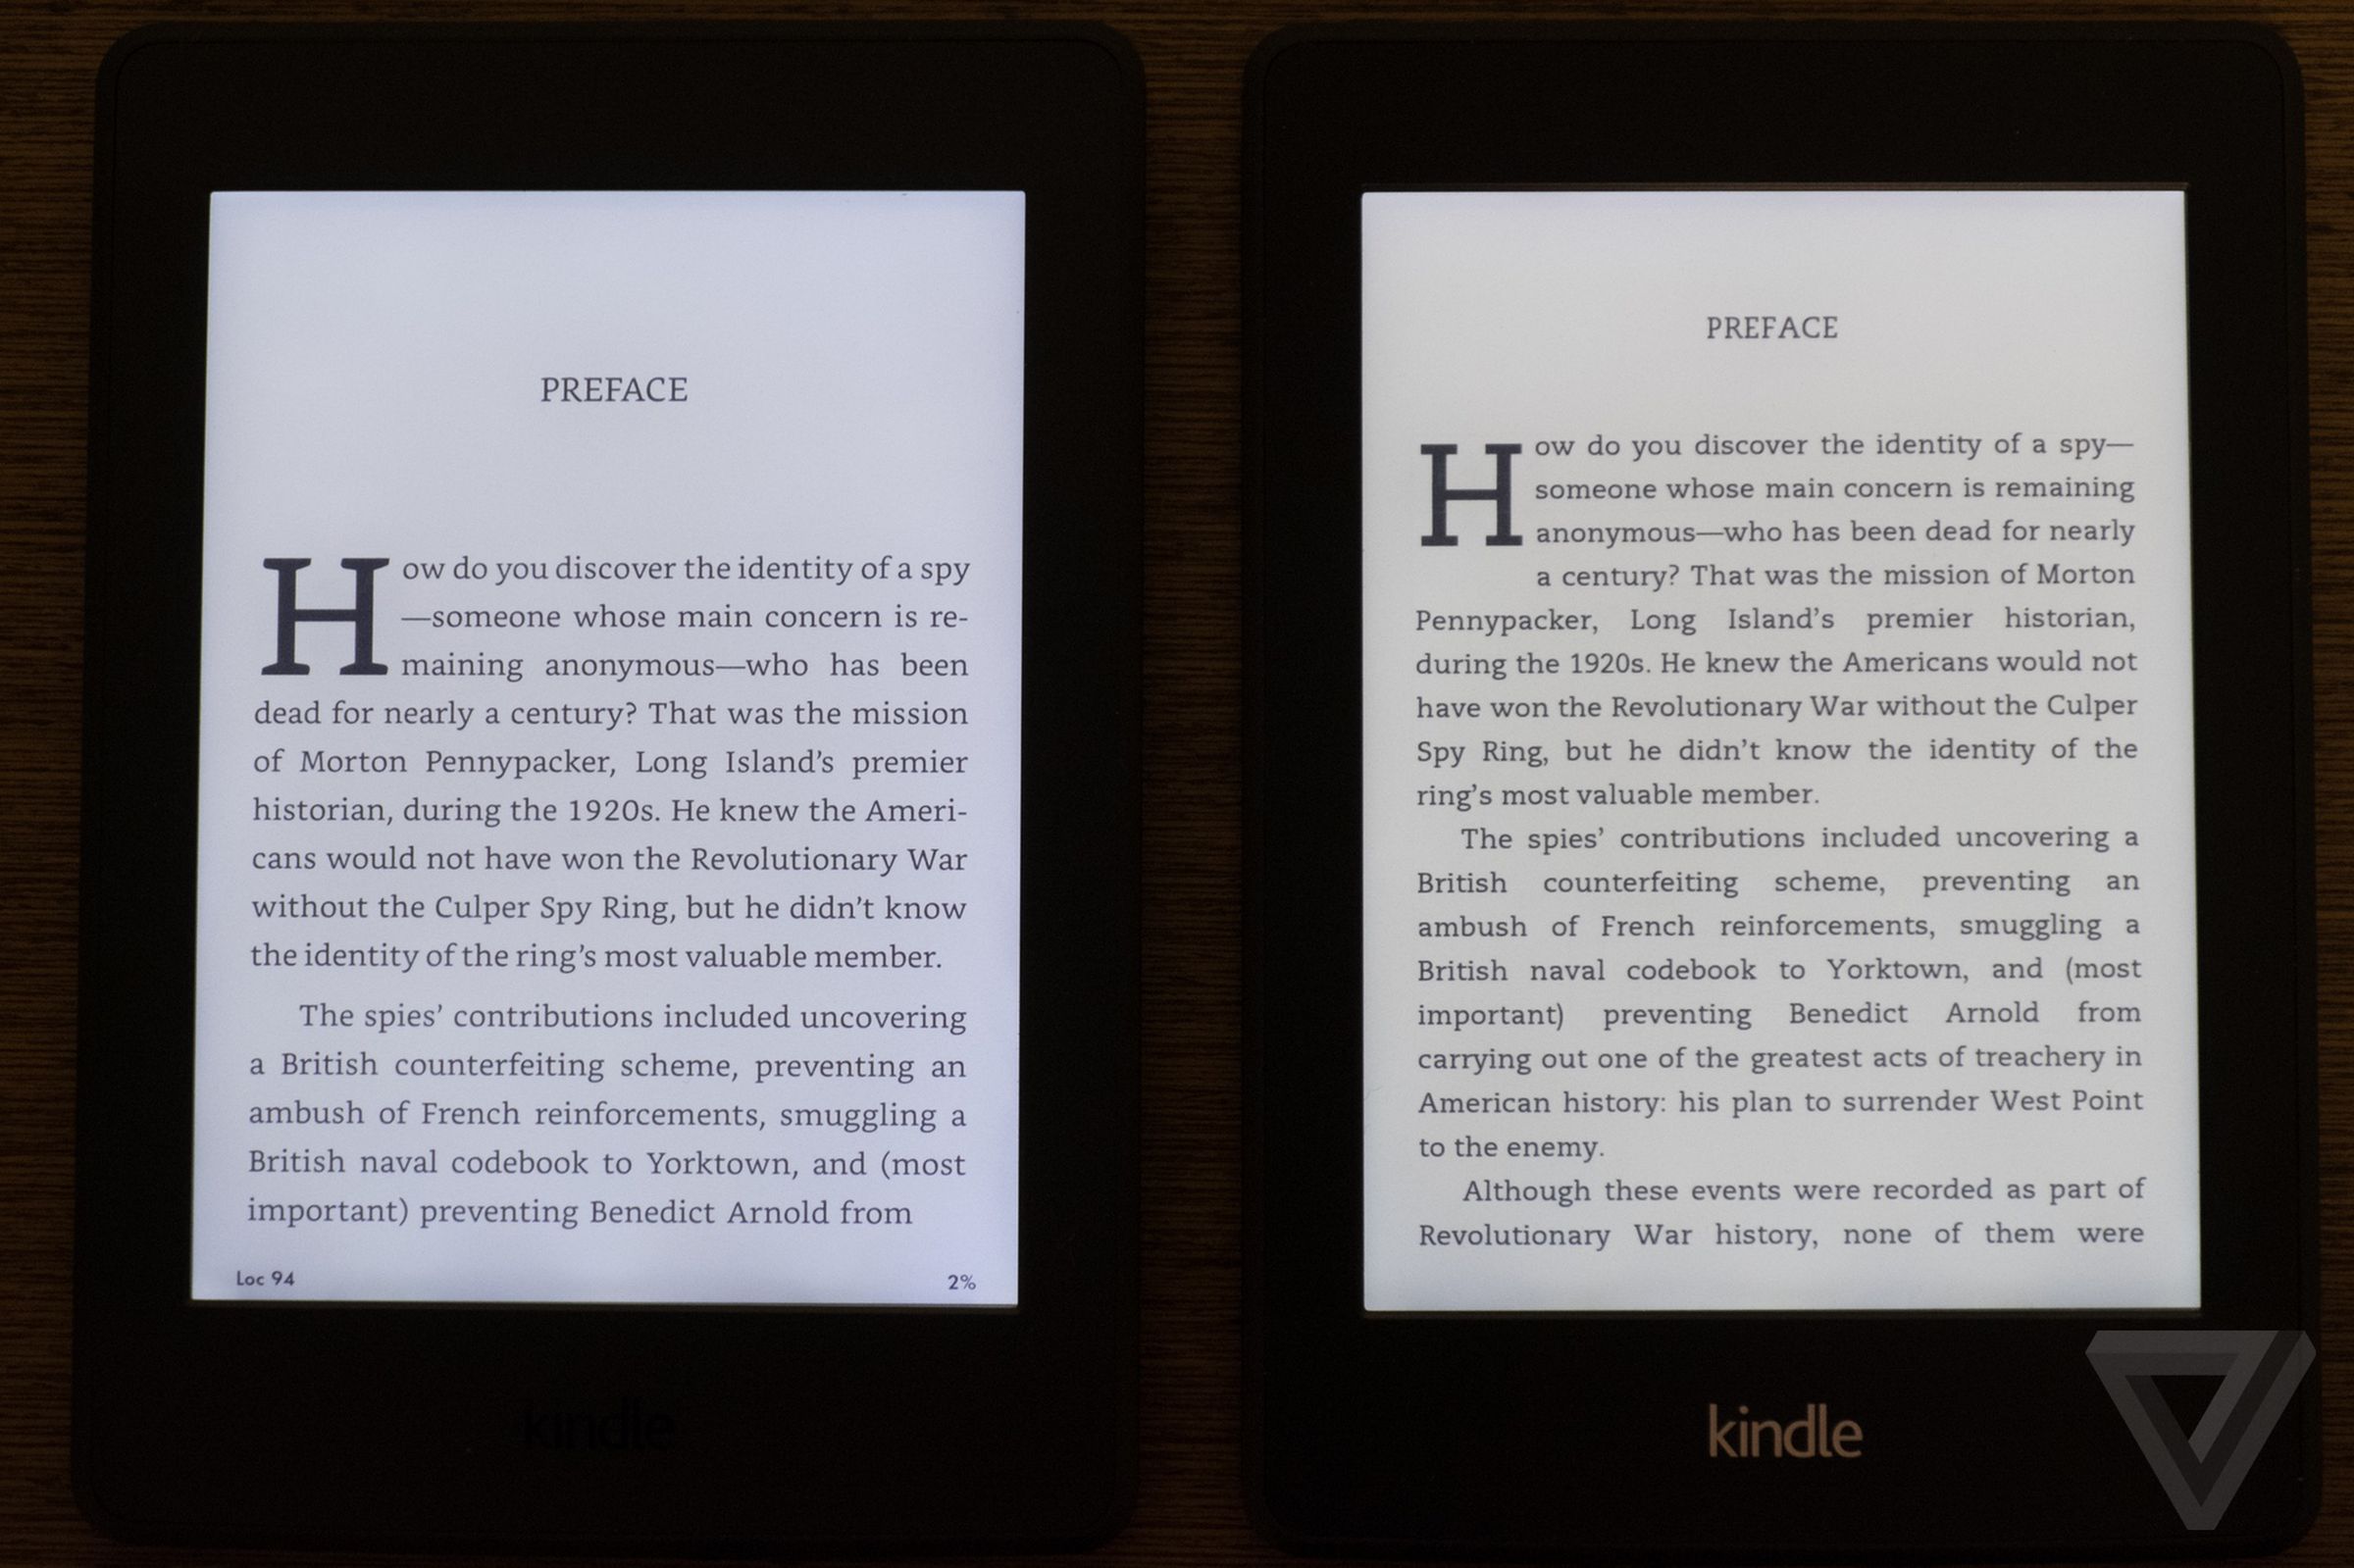 Kindle Paperwhite (2015) hands-on photos